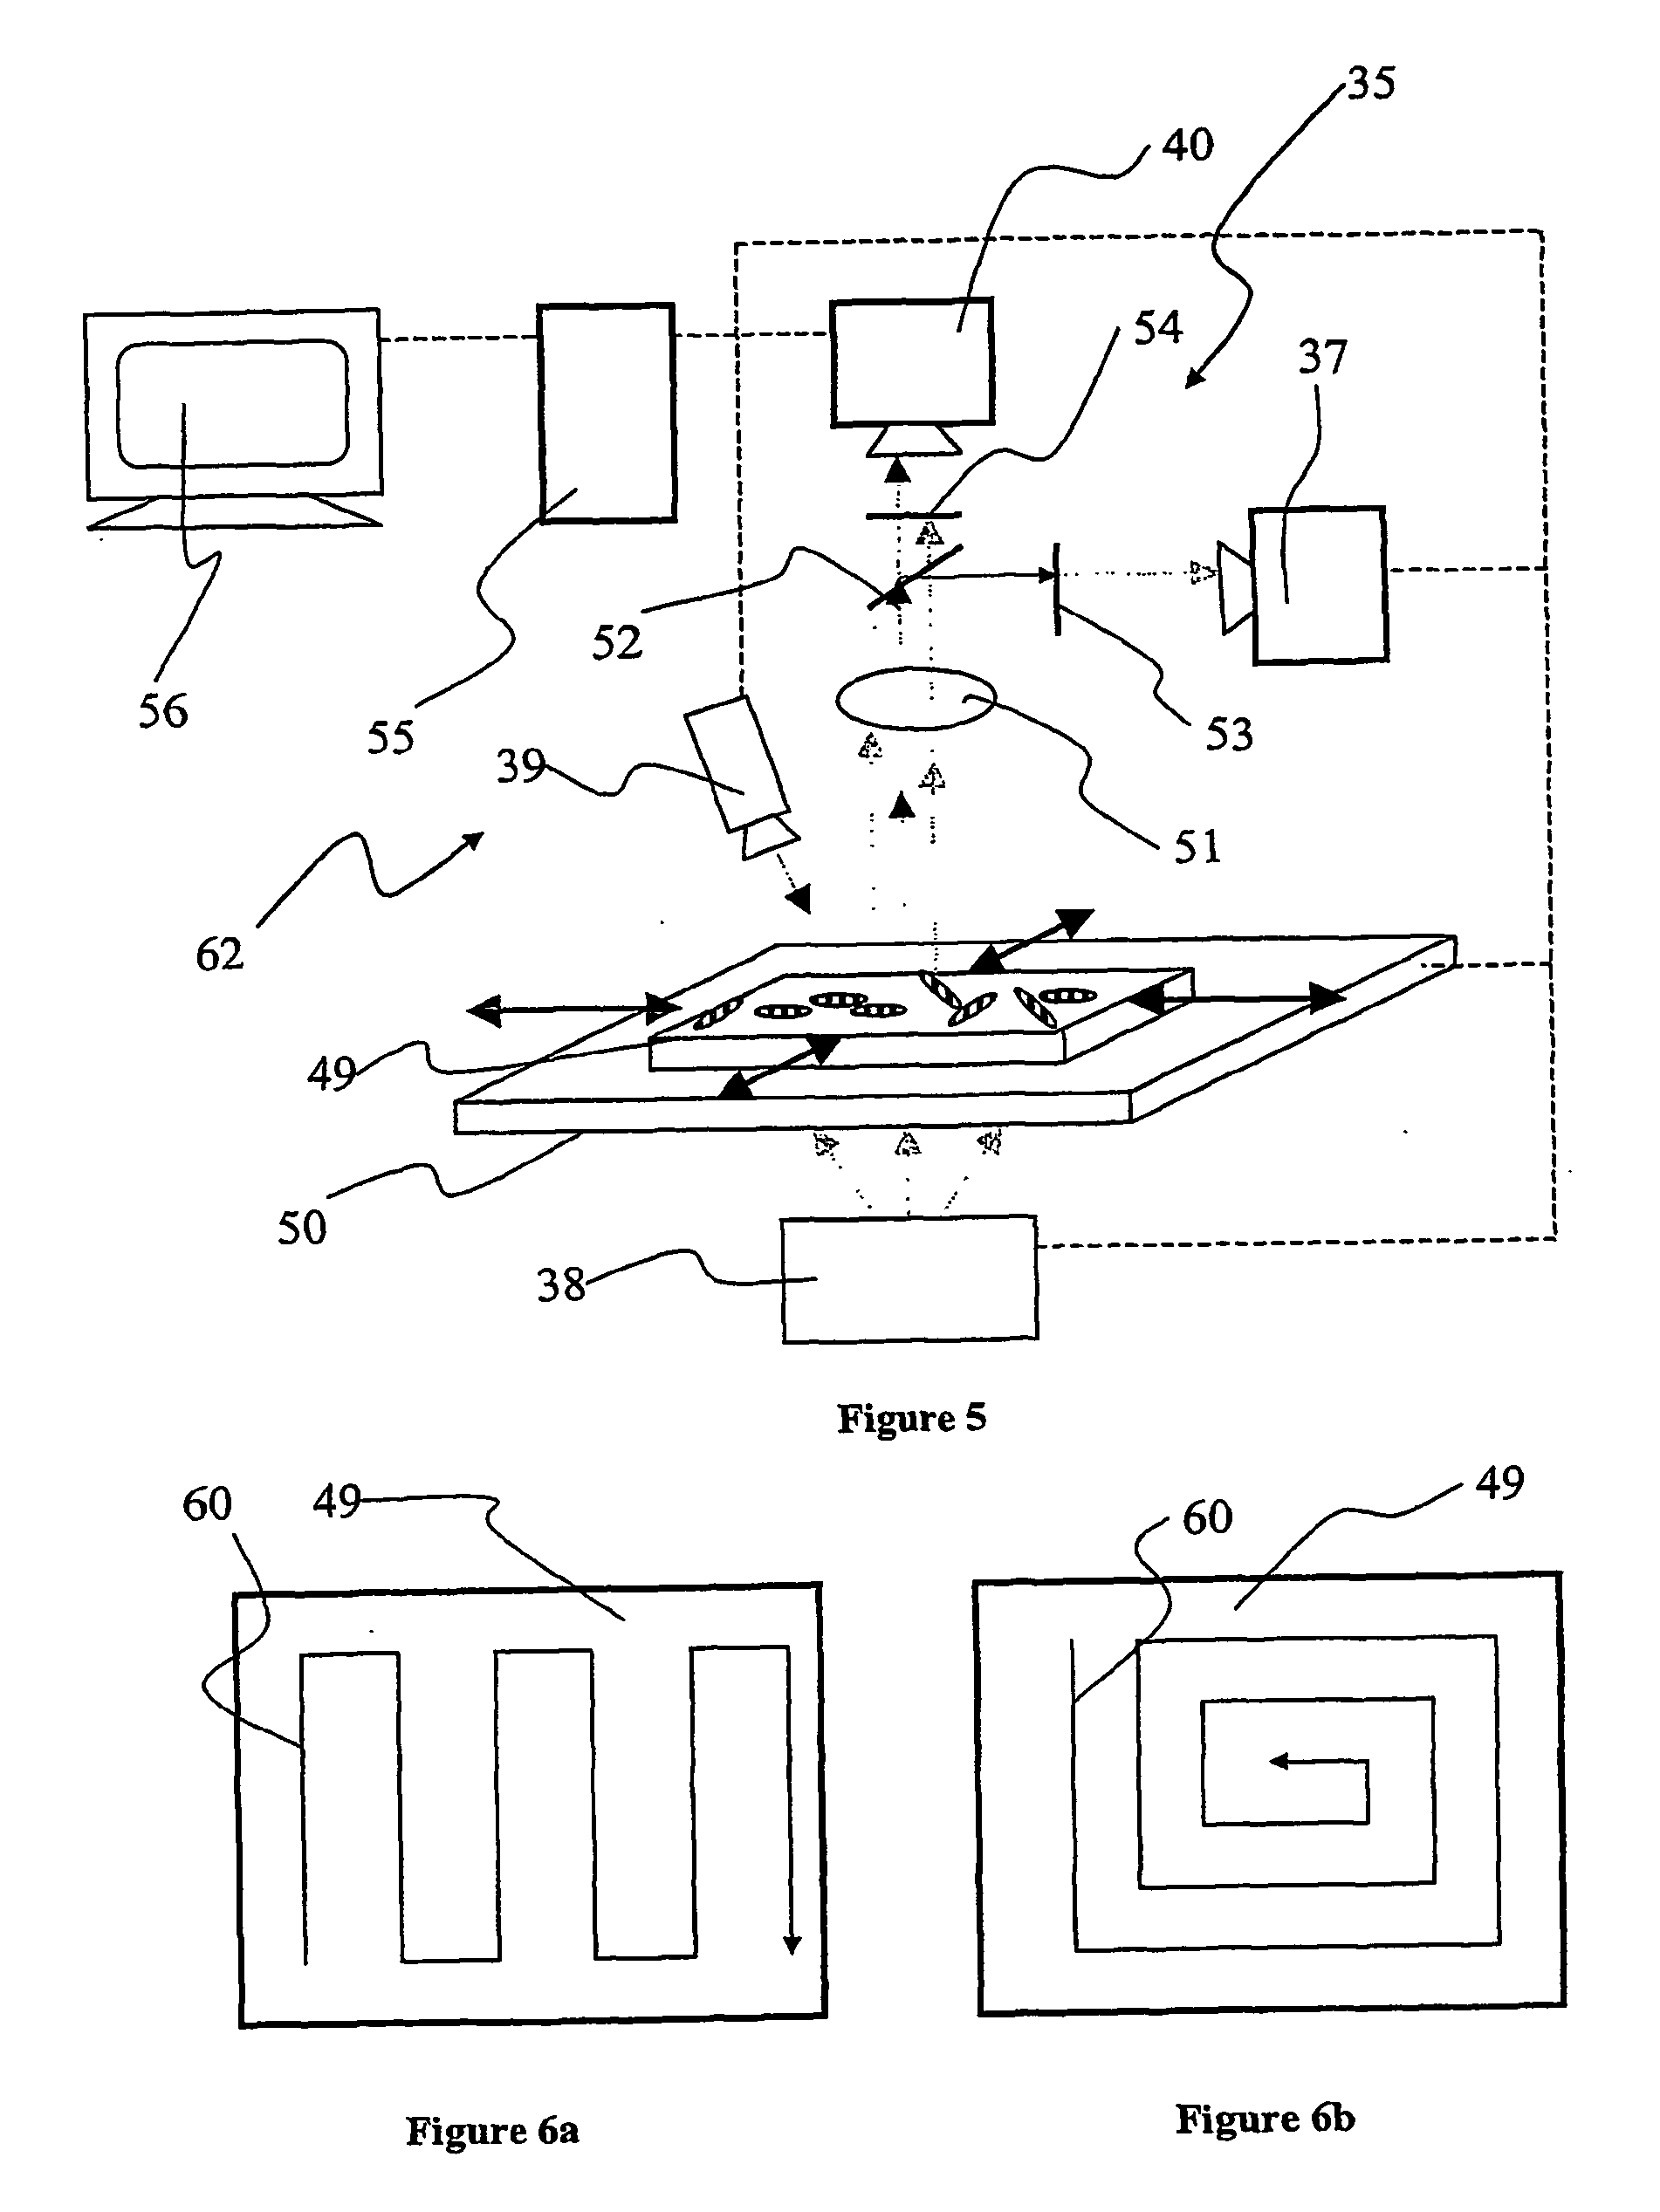 Biochemical method and apparatus for detecting genetic characteristic